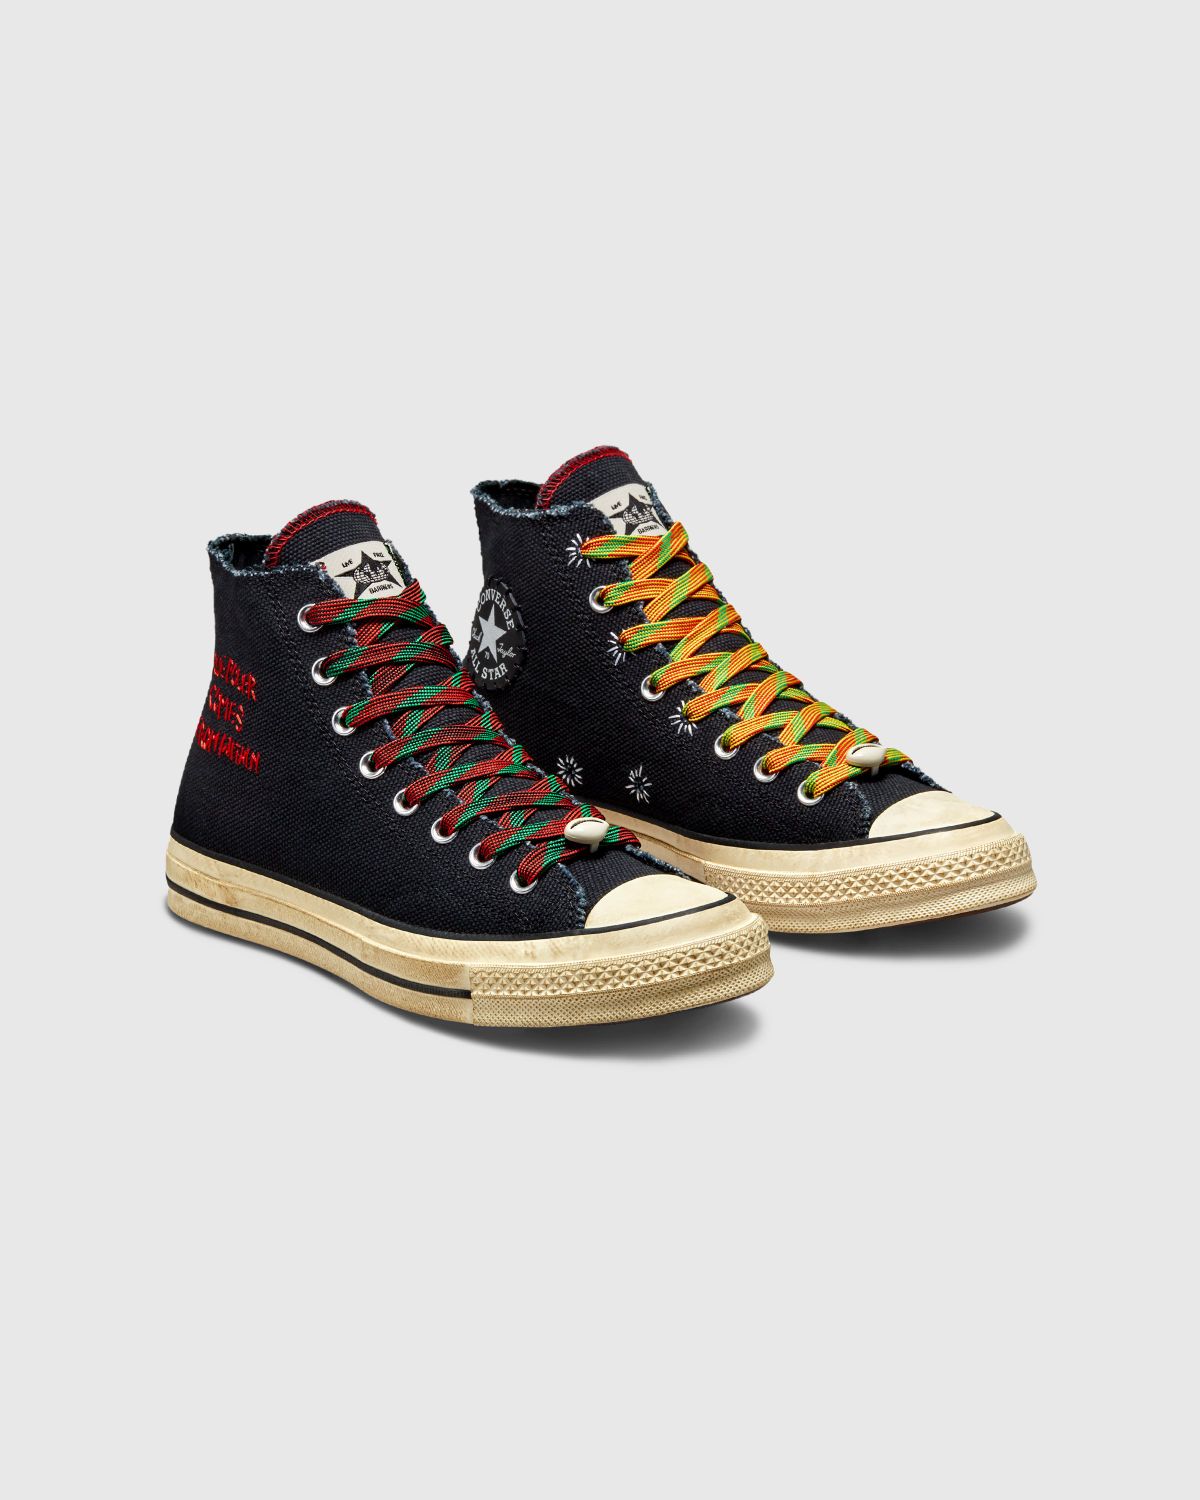 Converse x Barriers – Chuck 70 Hi Black/Fiery Red - High Top Sneakers - Black - Image 3